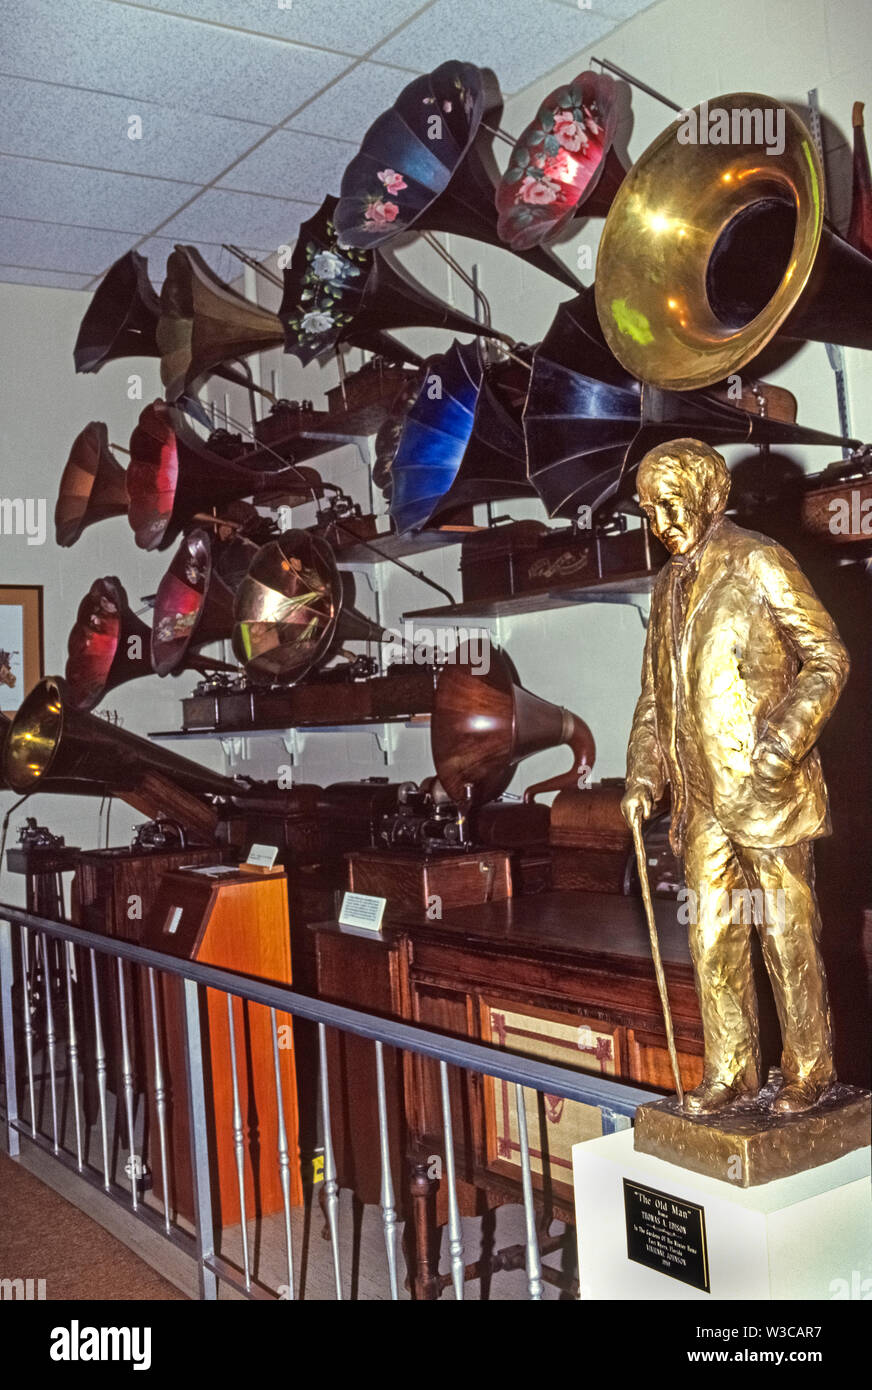 A golden-colored bronze statue of Thomas Alva Edison, the American inventor of the phonograph in 1877, is displayed with some early phonographs at his former winter estate in Fort Myers, Florida, USA. That 21-acre property is now a sprawling historical museum where visitors can also see other famous Edison inventions, including incandescent light bulbs and the motion picture camera. While his initial phonograph used a rotating cylinder covered with tinfoil to record and play back sound, later models utilized wax-coated cylinders and were fitted with large horns to amplify the sound. Stock Photo